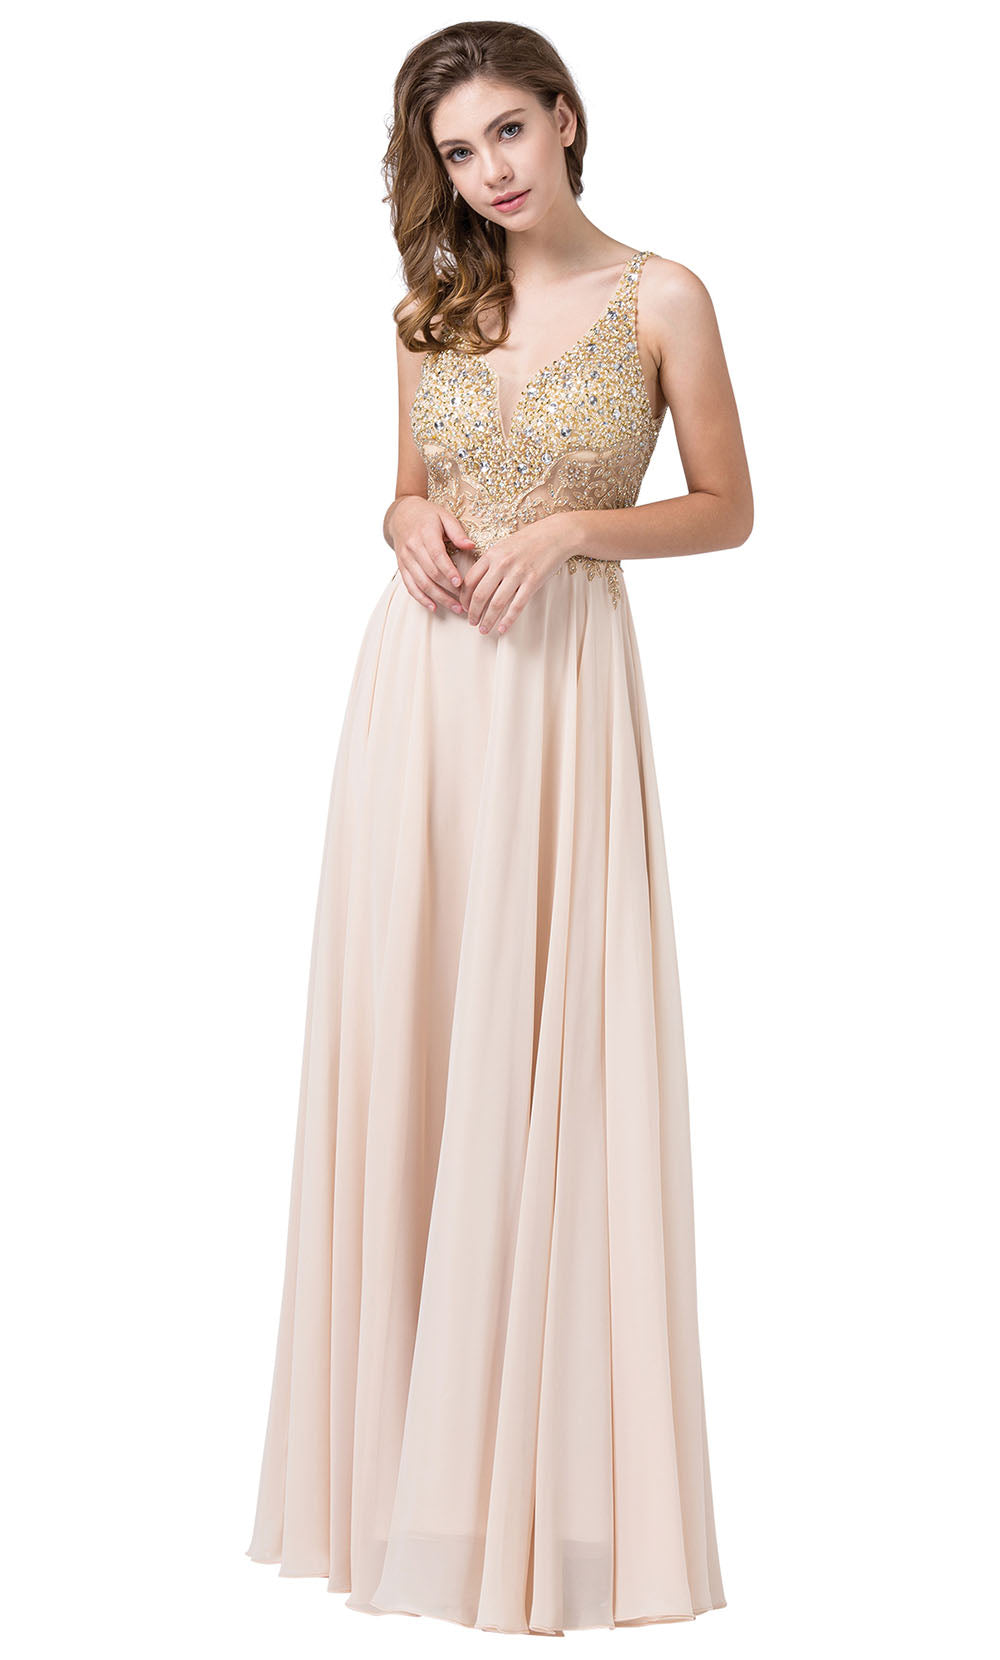 Dancing Queen - 2494 Beaded Gold Applique Bodice A-Line Gown In Champagne & Gold